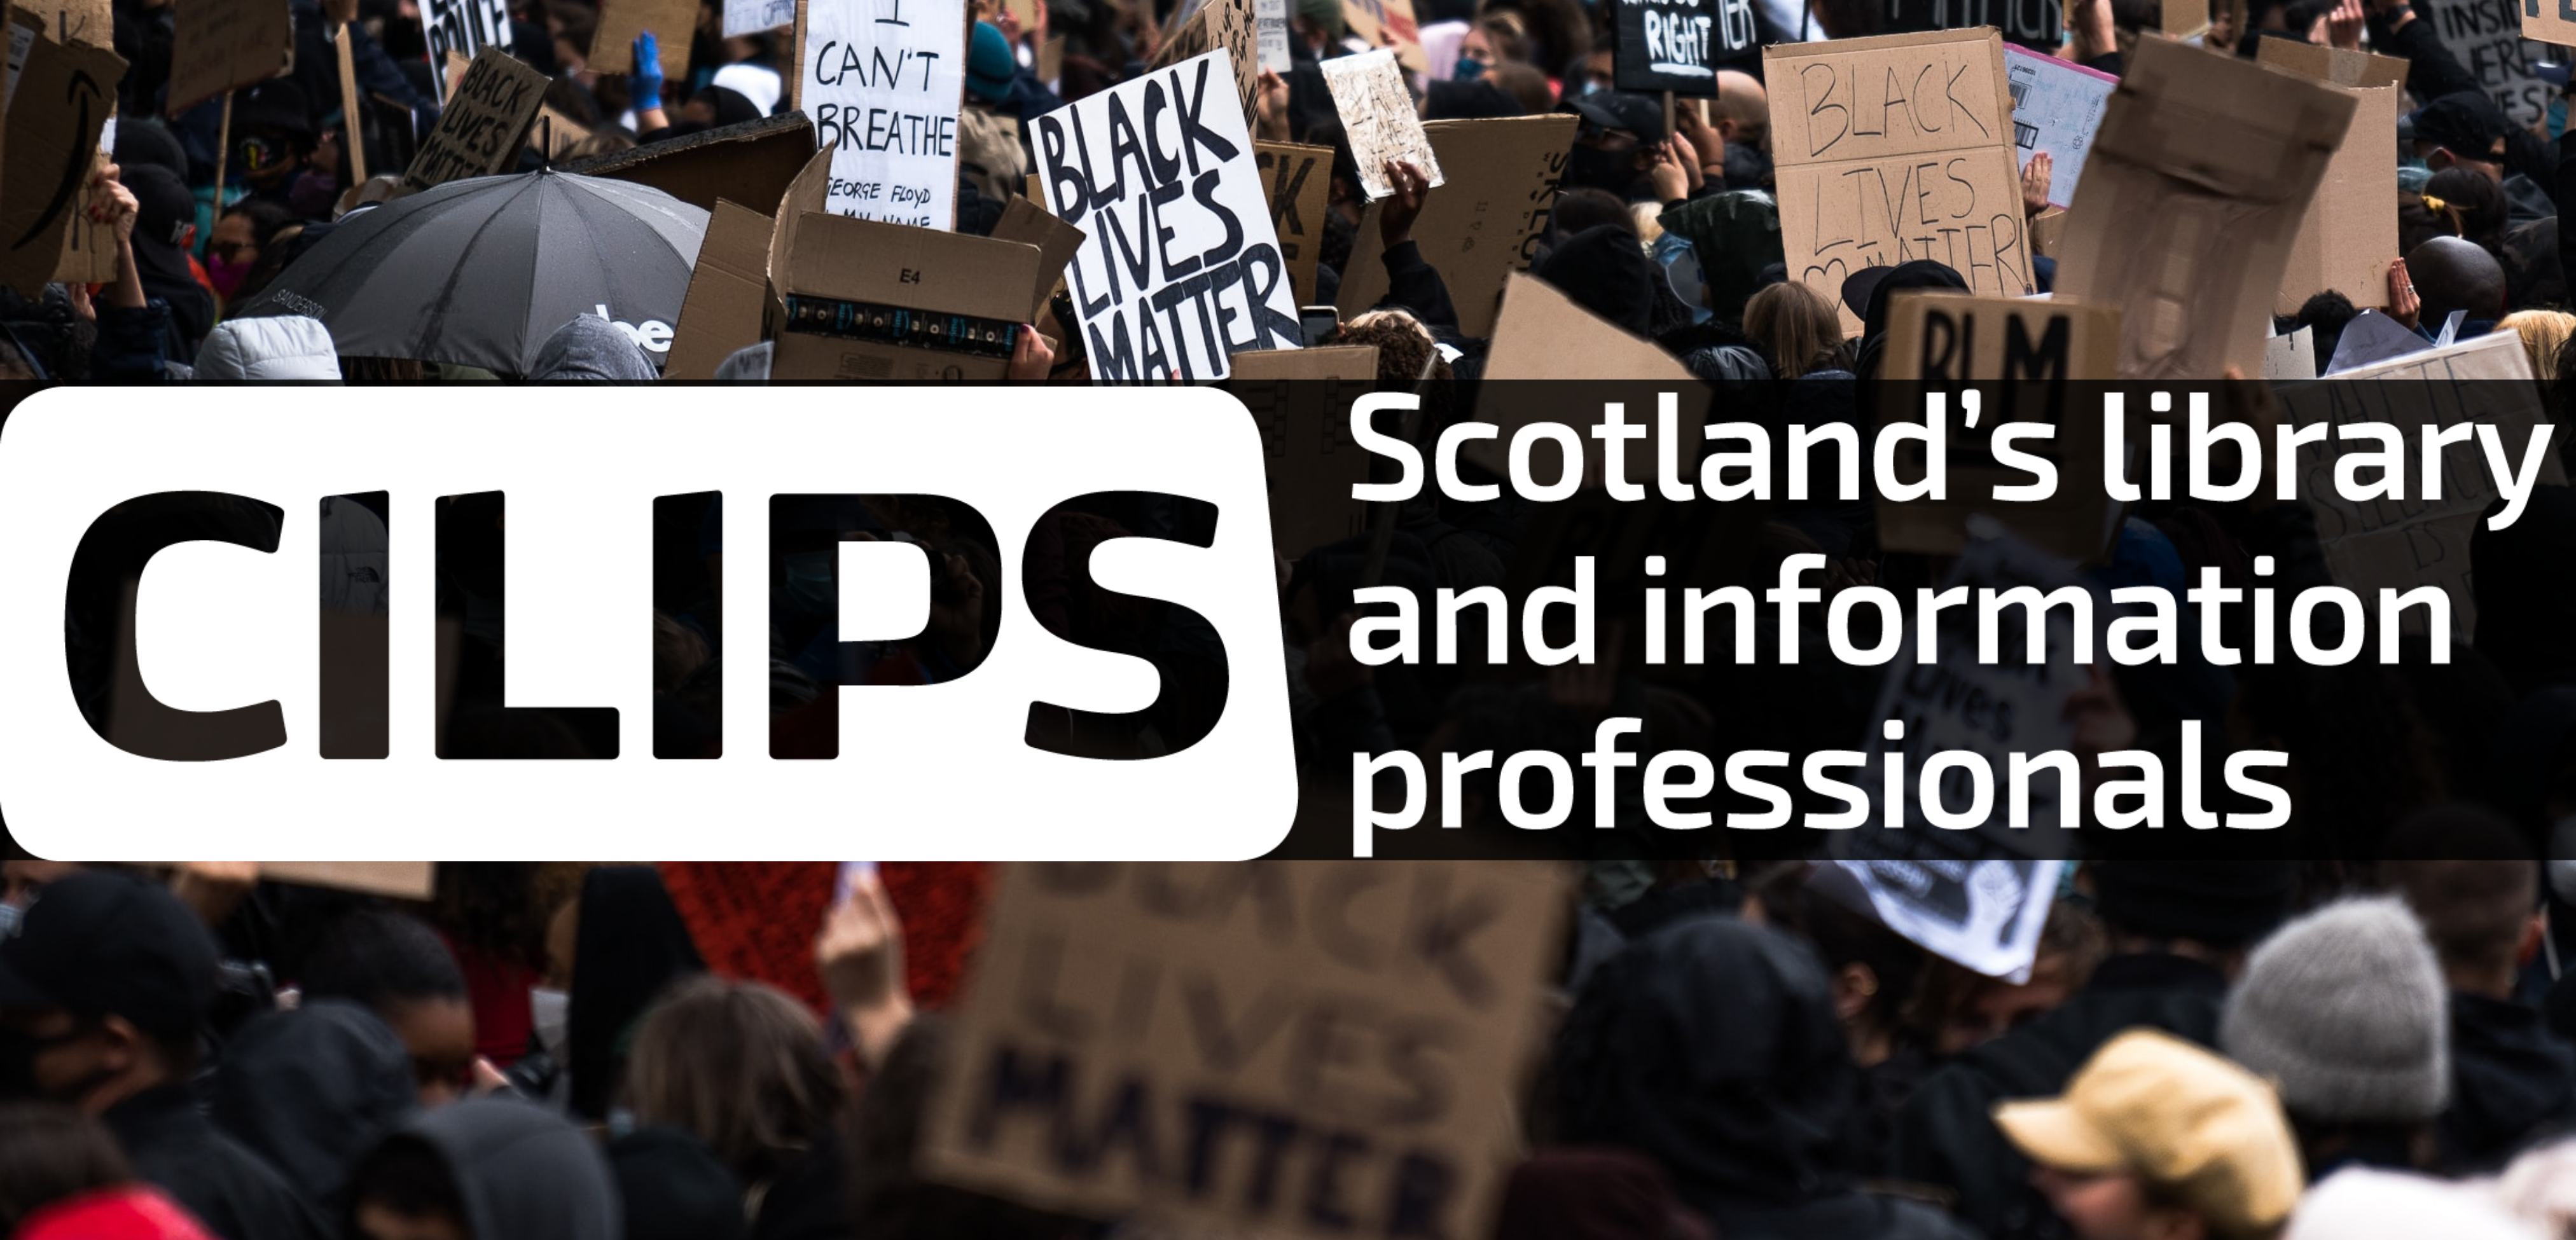 the CILIPS logo with a background photograph from a Black Lives Matter protest